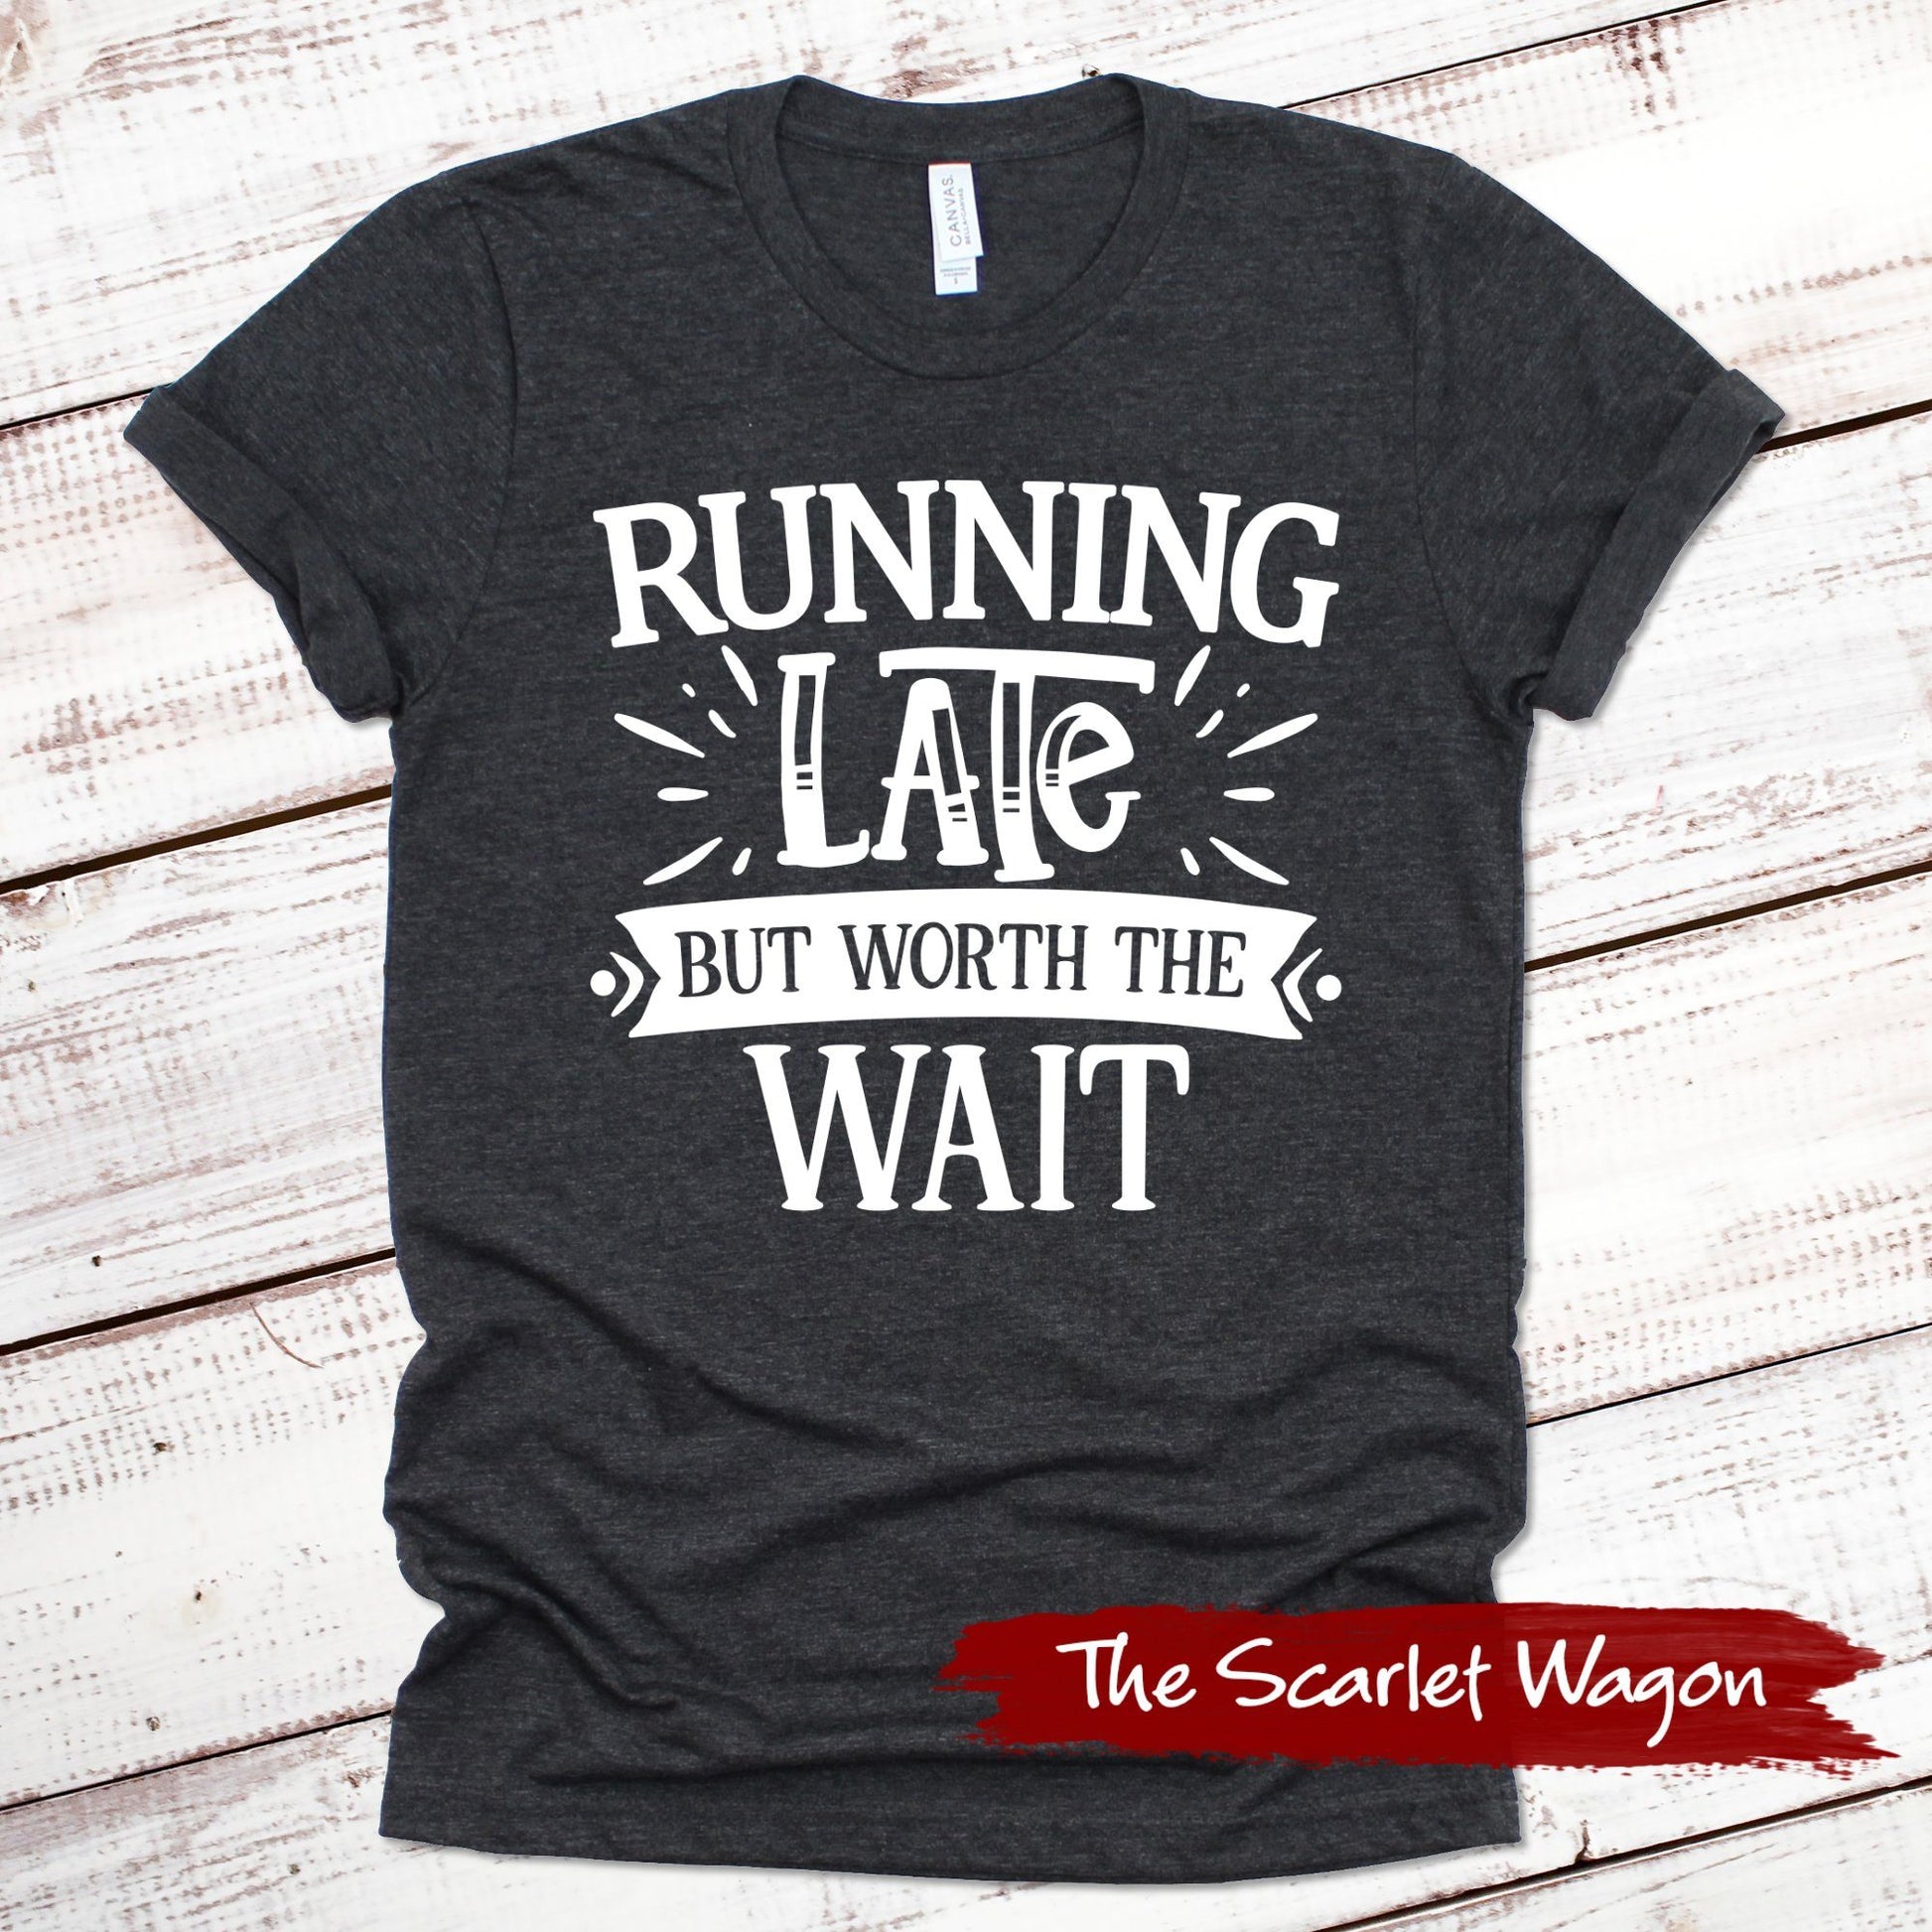 Running Late But Worth the Wait Funny Shirt Scarlet Wagon Dark Gray Heather XS 